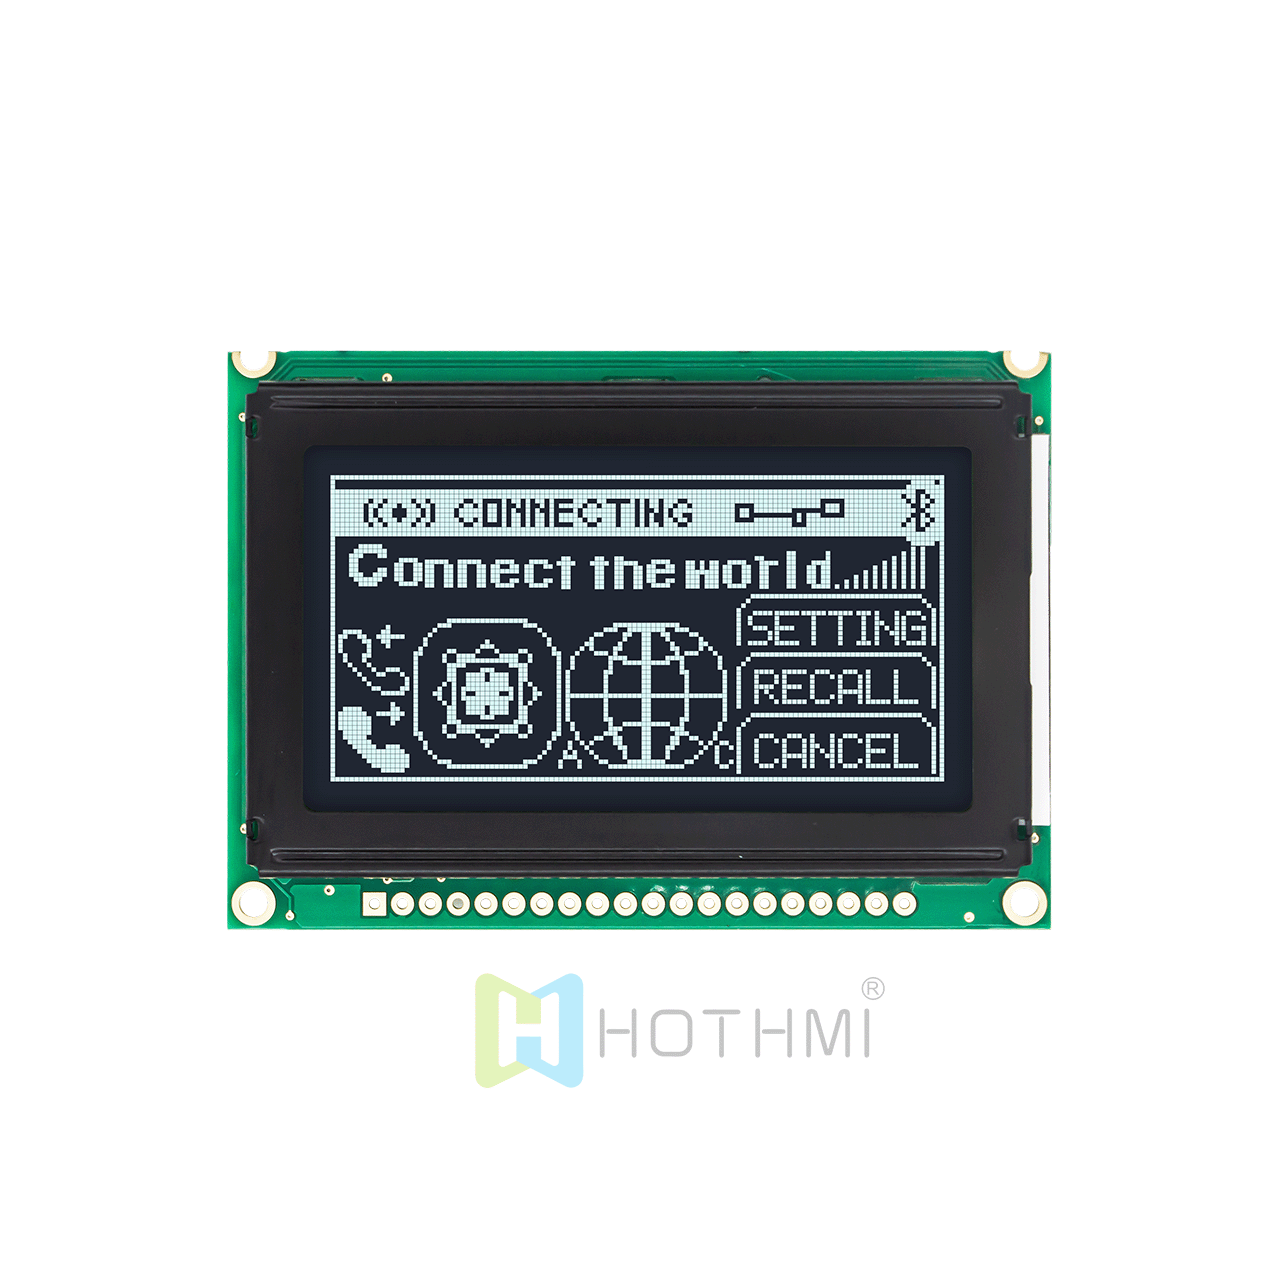 2.7 inch 128x64 Graphic LCD Liquid Crystal Dot Matrix Module | DFSTN Negative Display | For Arduino | Black Background and White Characters